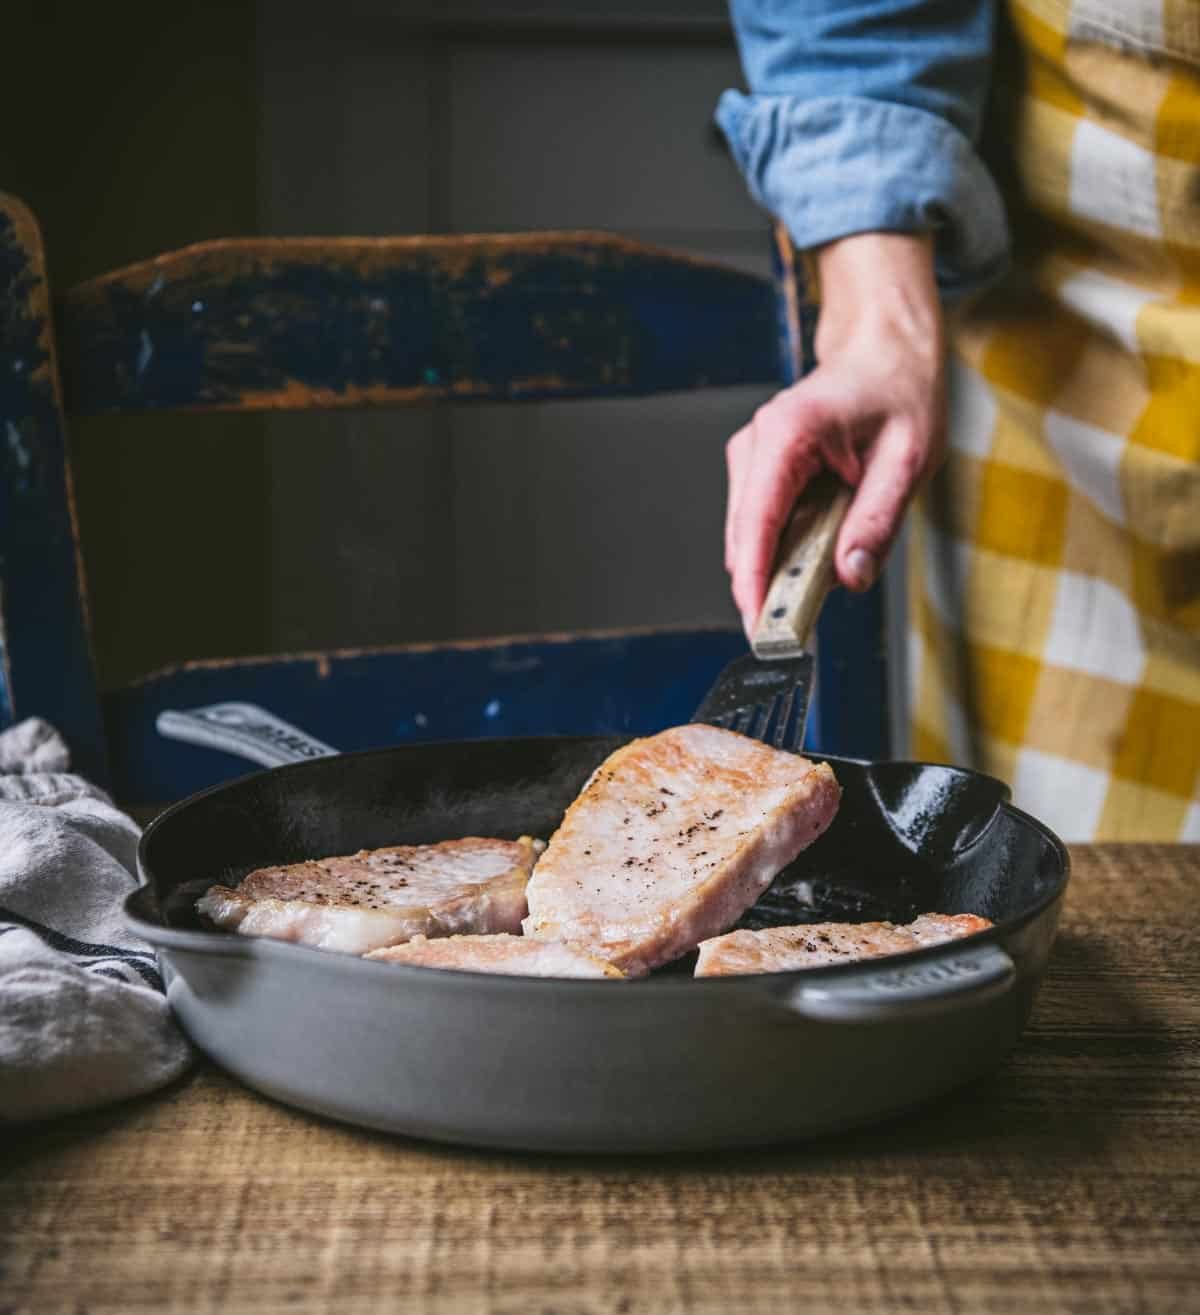 Pan frying pork chops in a cast iron skillet